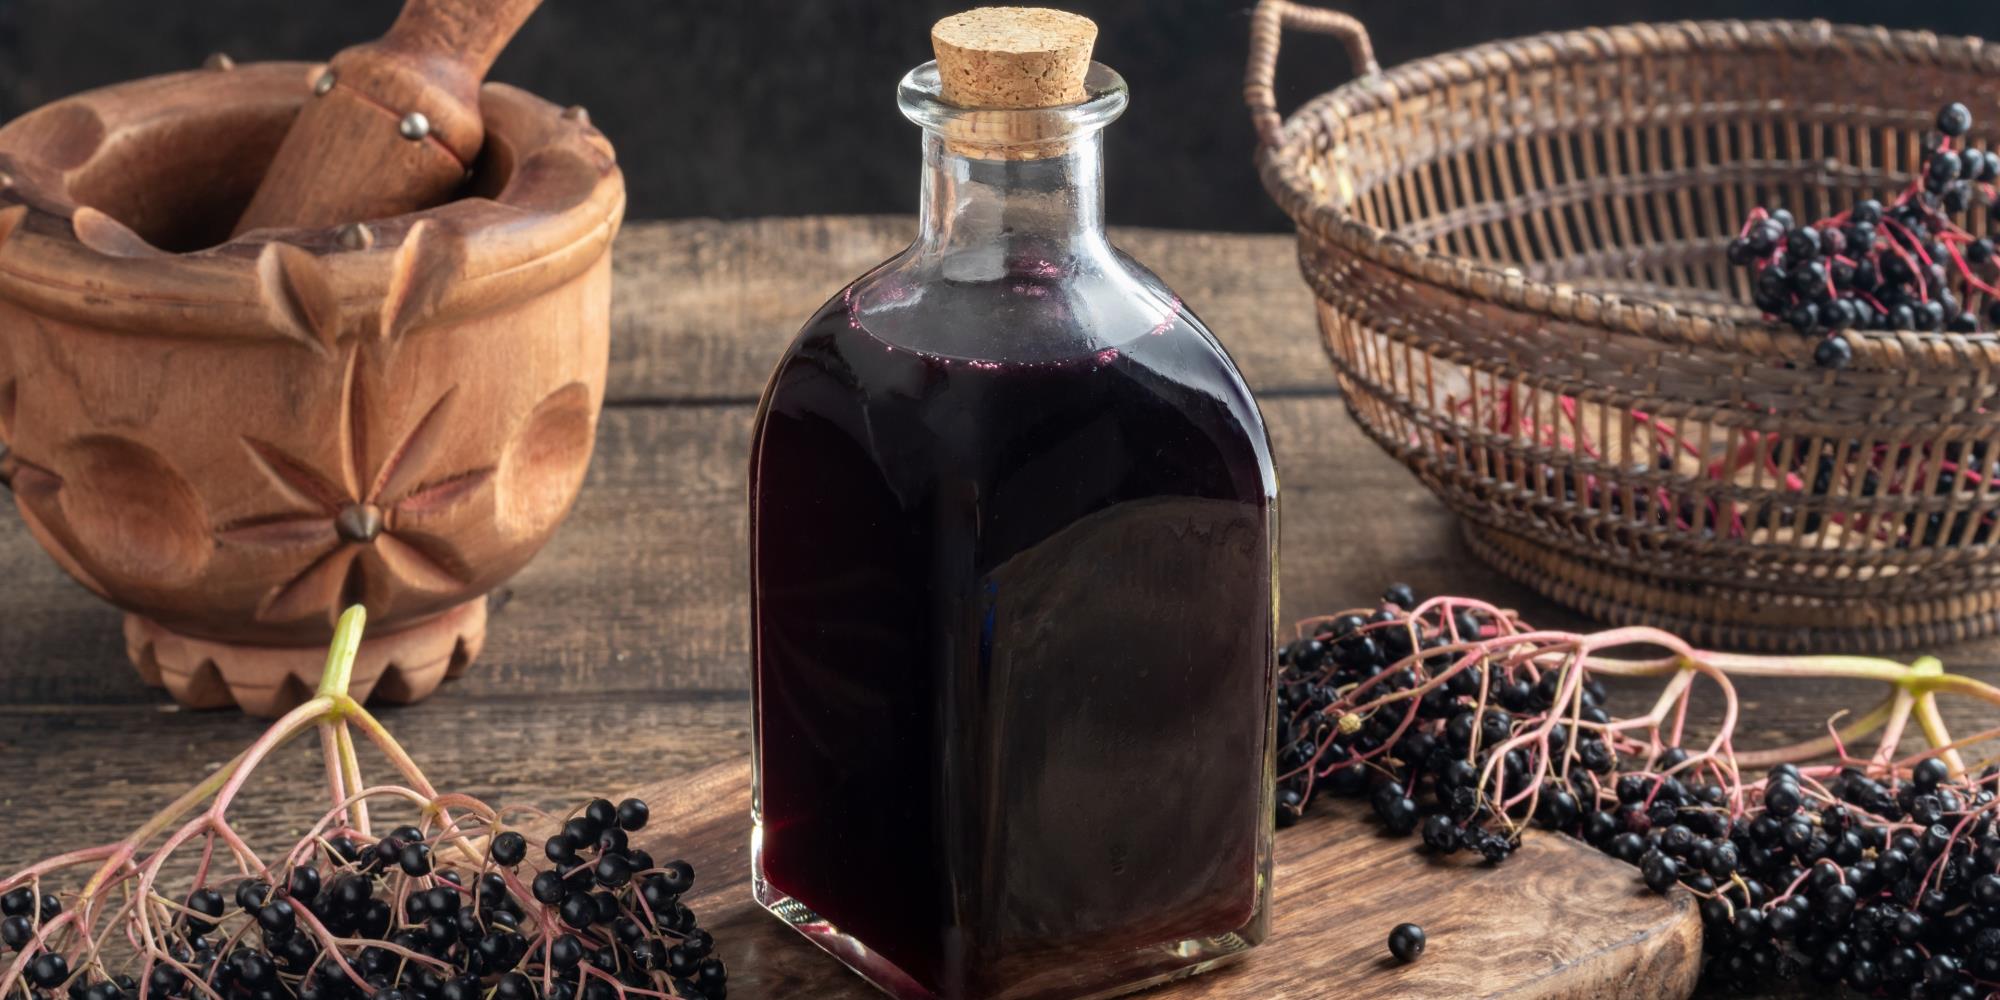 Does Elderberry Syrup help boost immunity?